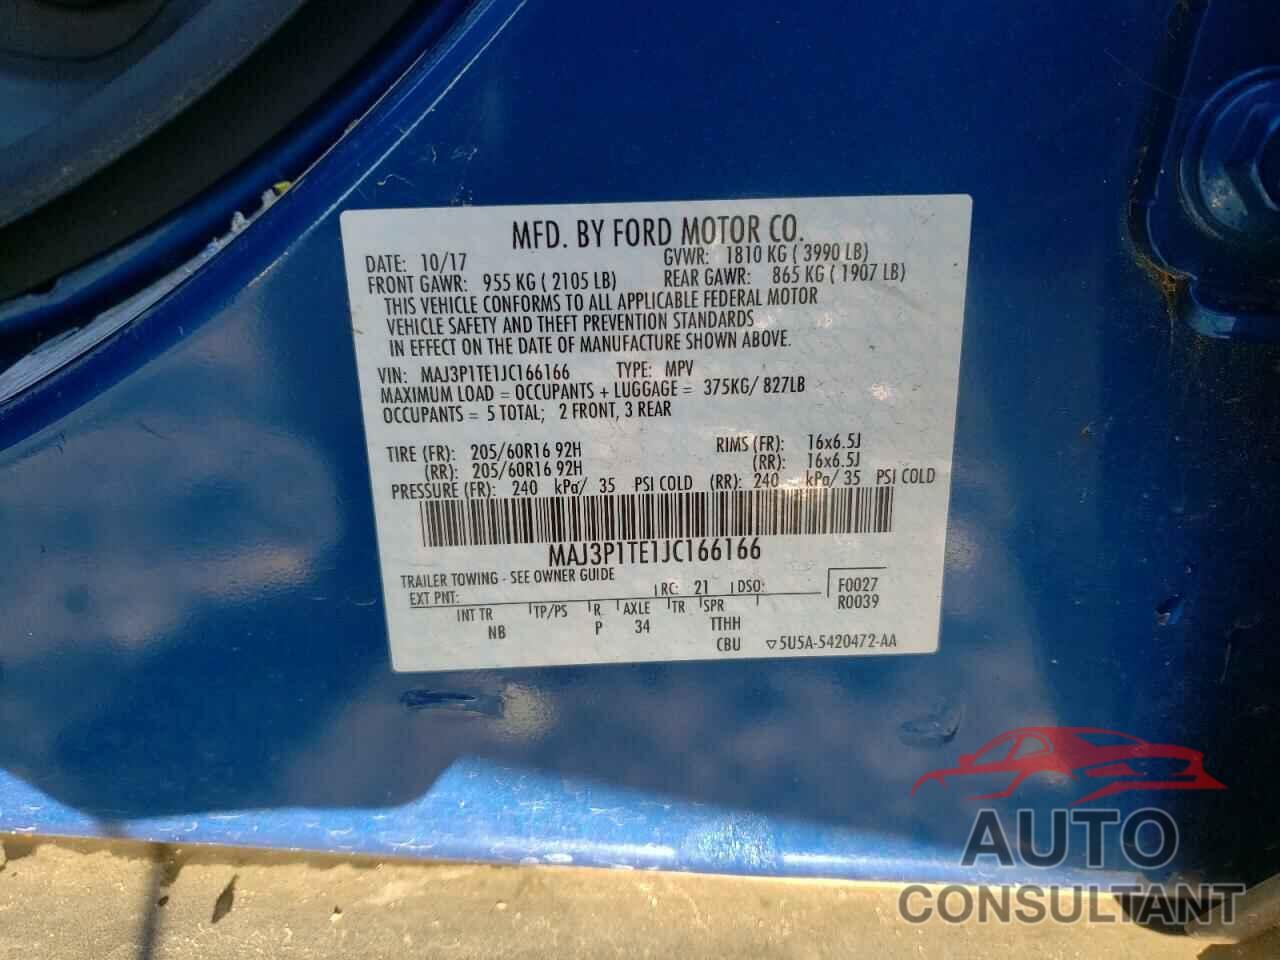 FORD ALL OTHER 2018 - MAJ3P1TE1JC166166